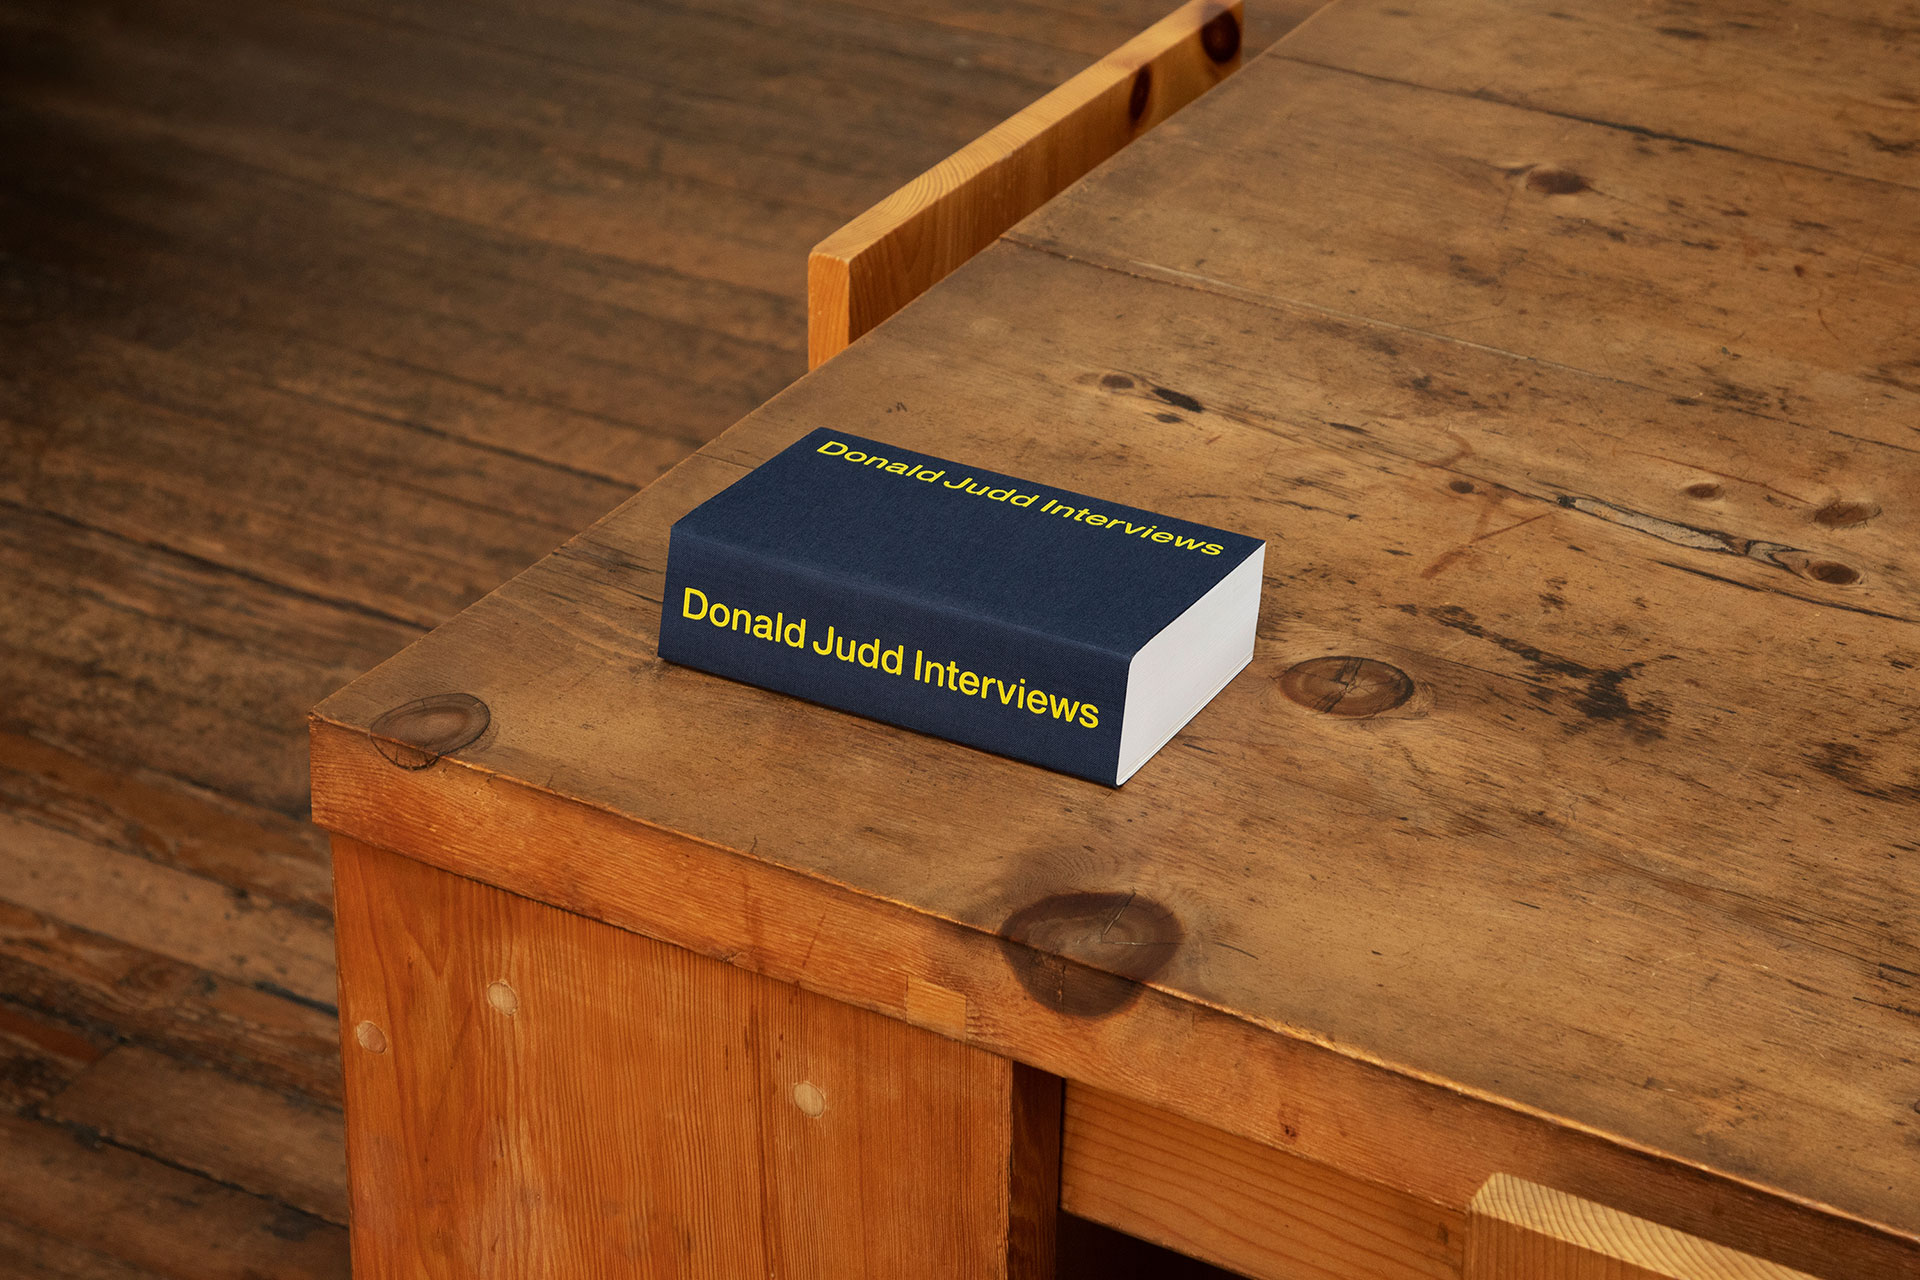 A photo of the book Donald Judd interviews.